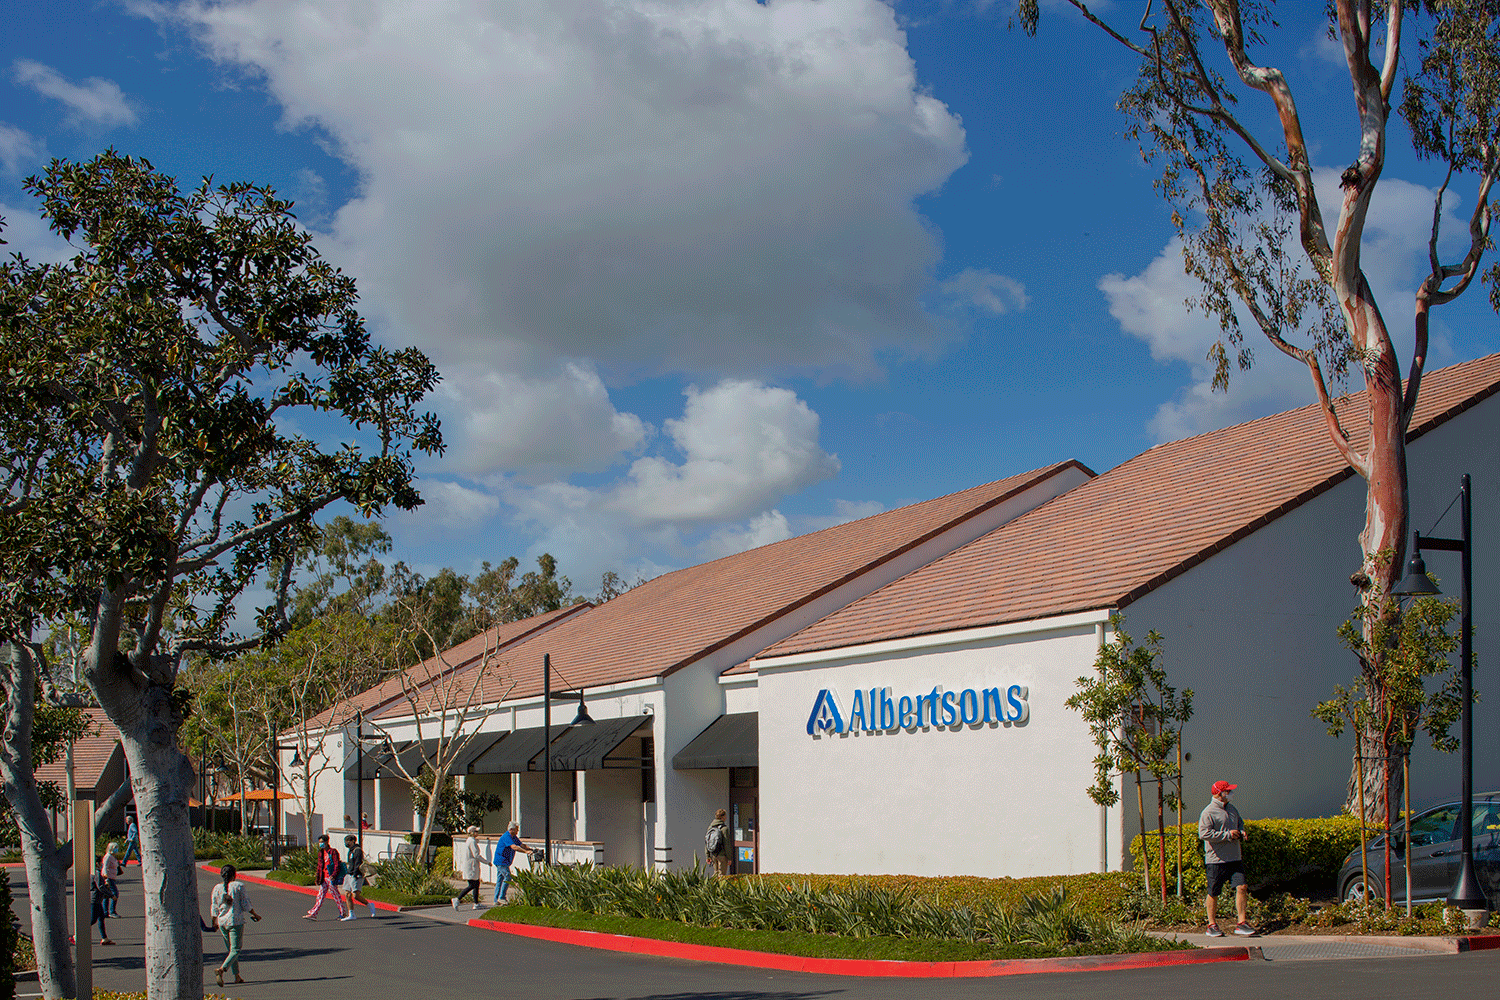  View of Albertsons at Campus Plaza